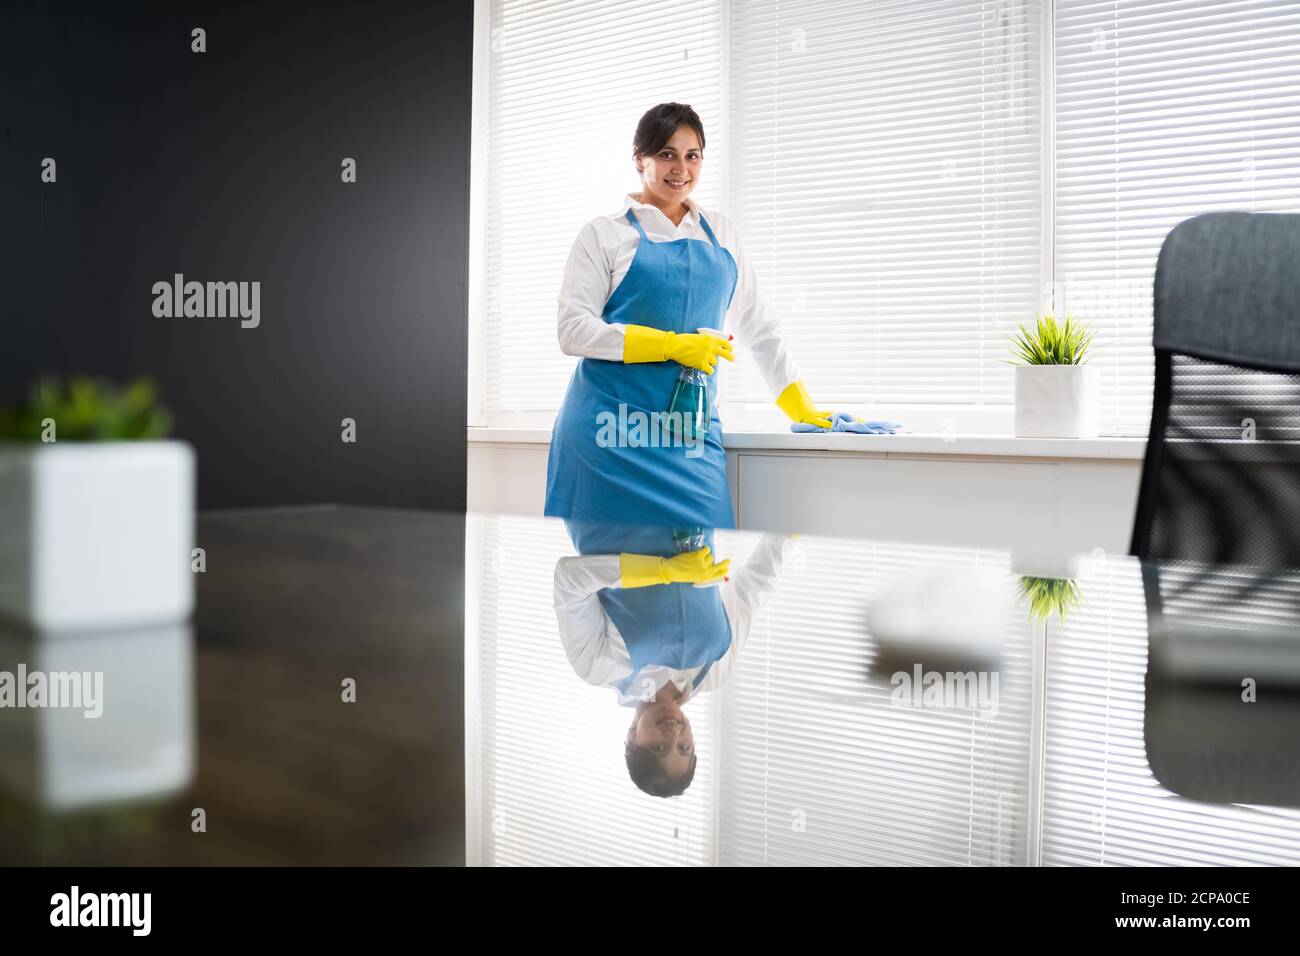 Professional House Cleaning Service. Room Cleaner And Housekeeper Stock Photo